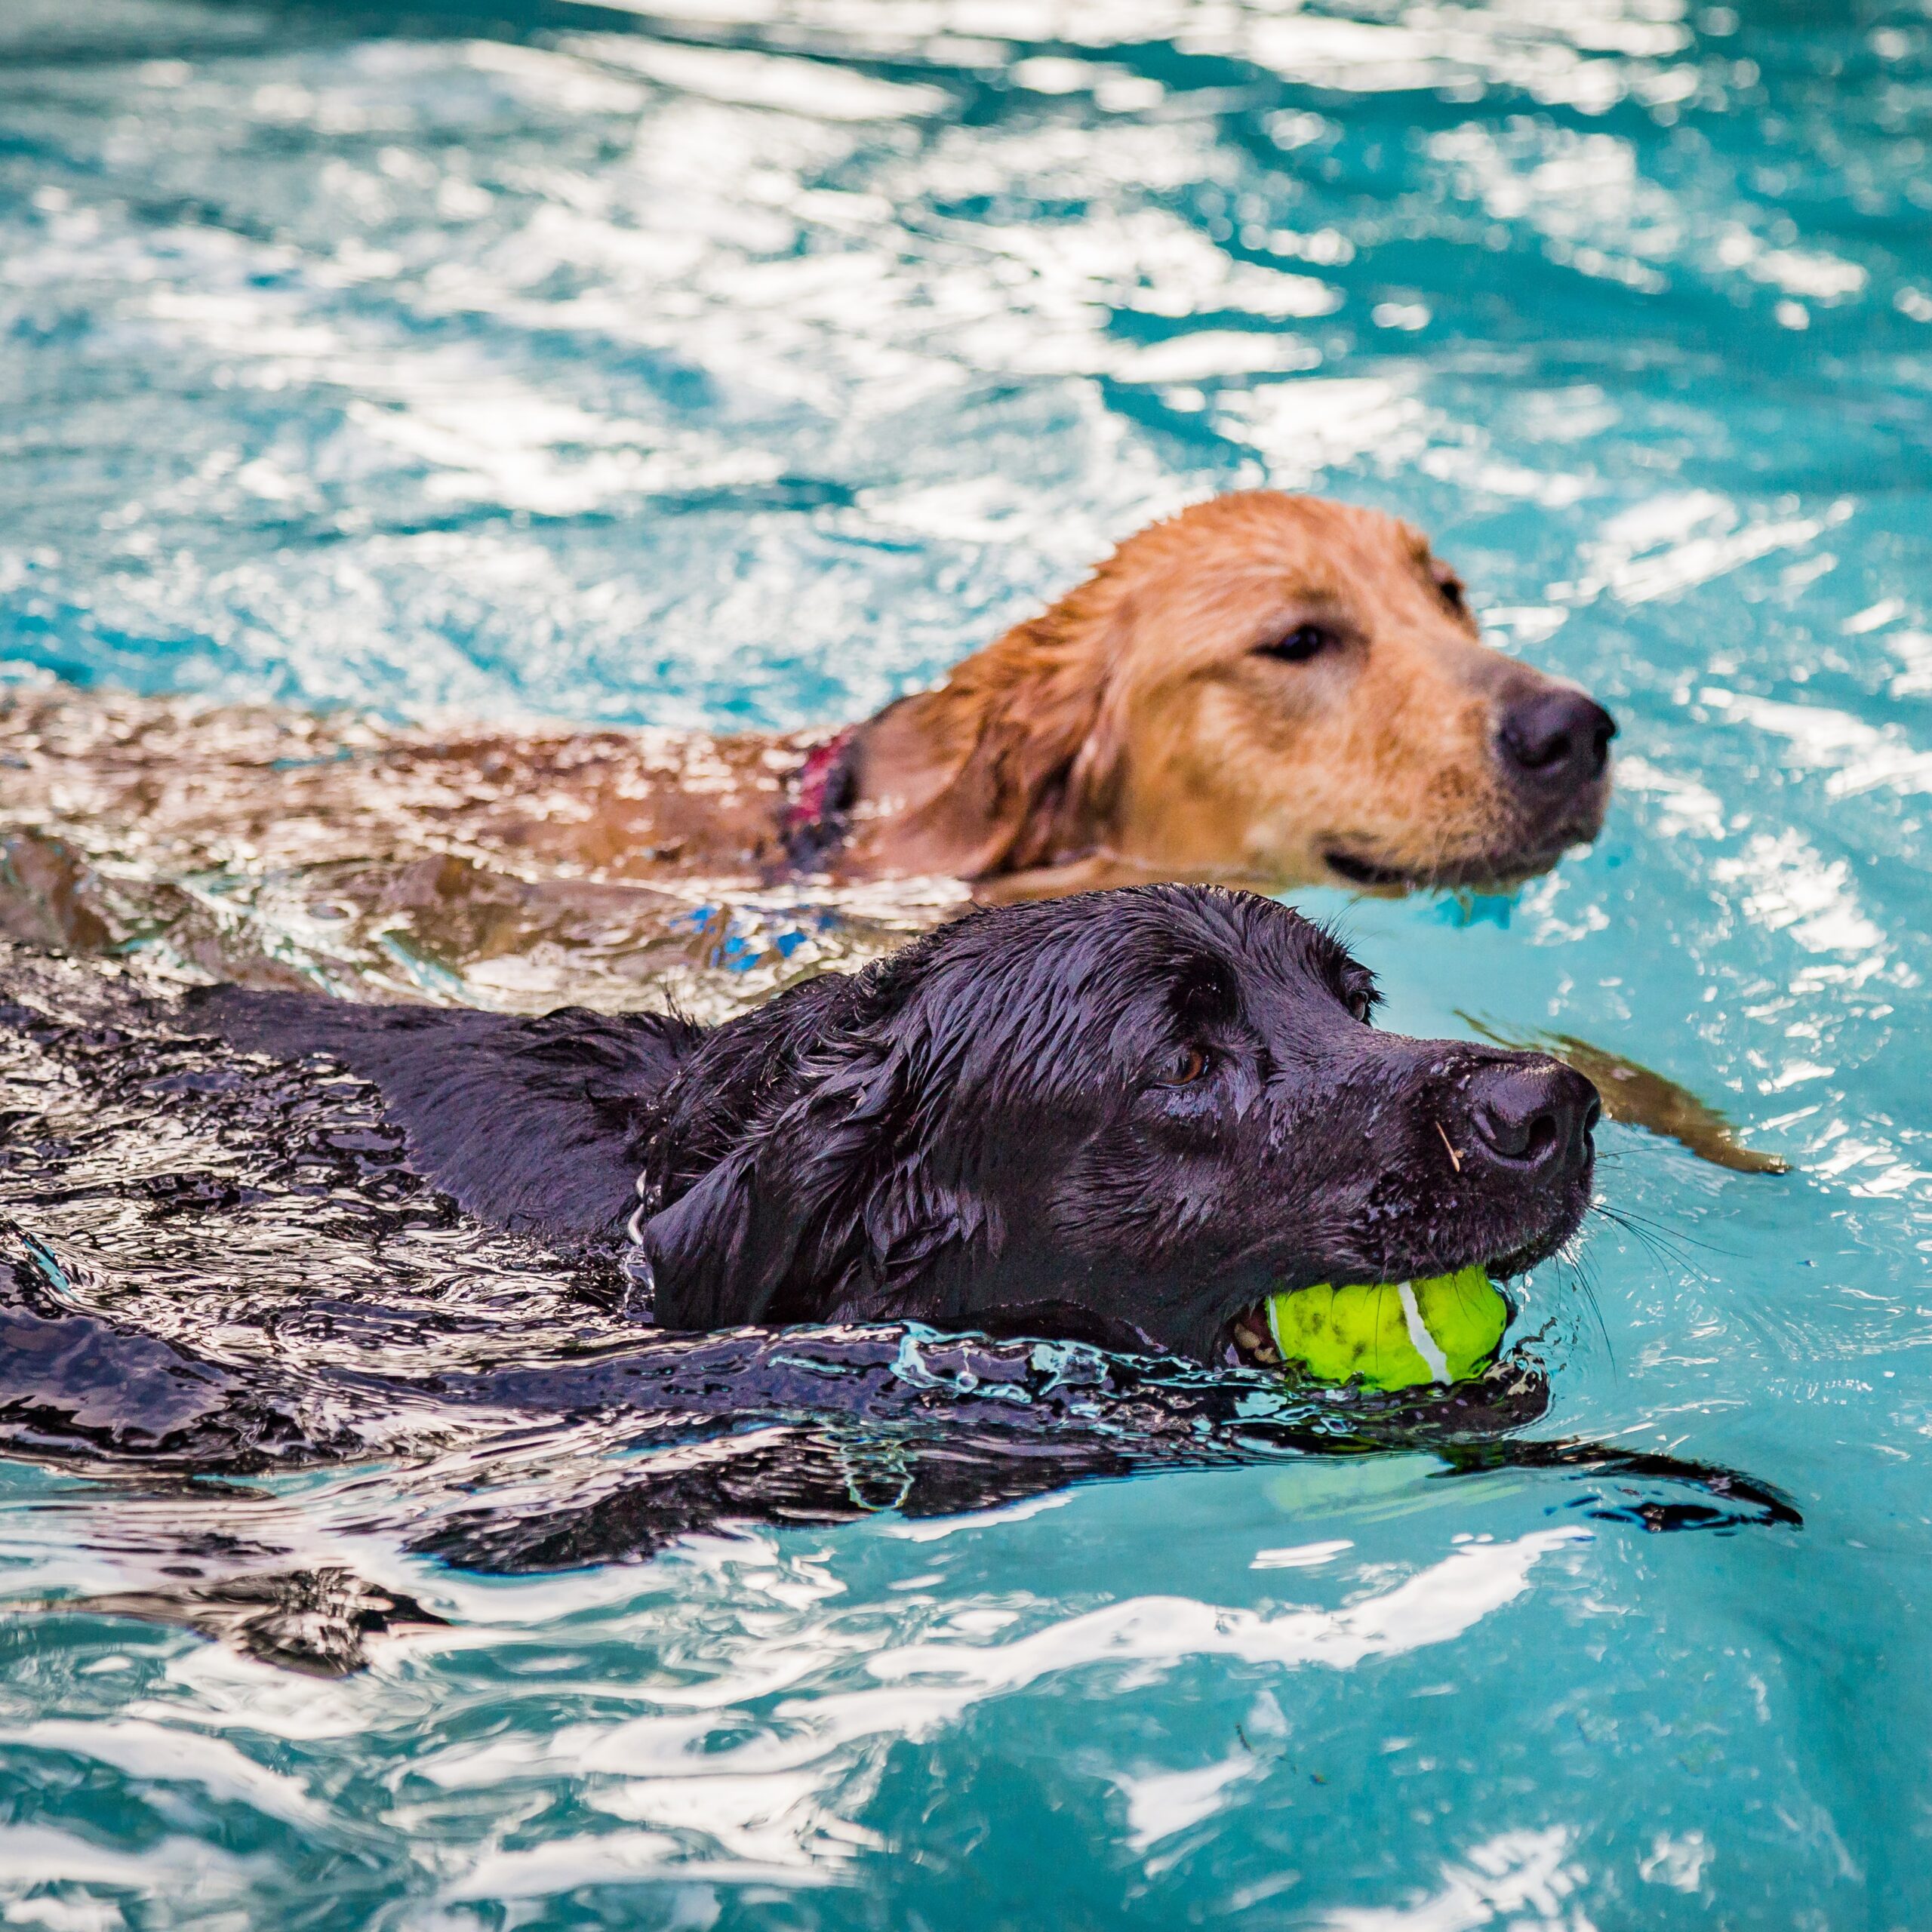 Dogs having a 'ball' in the pool!